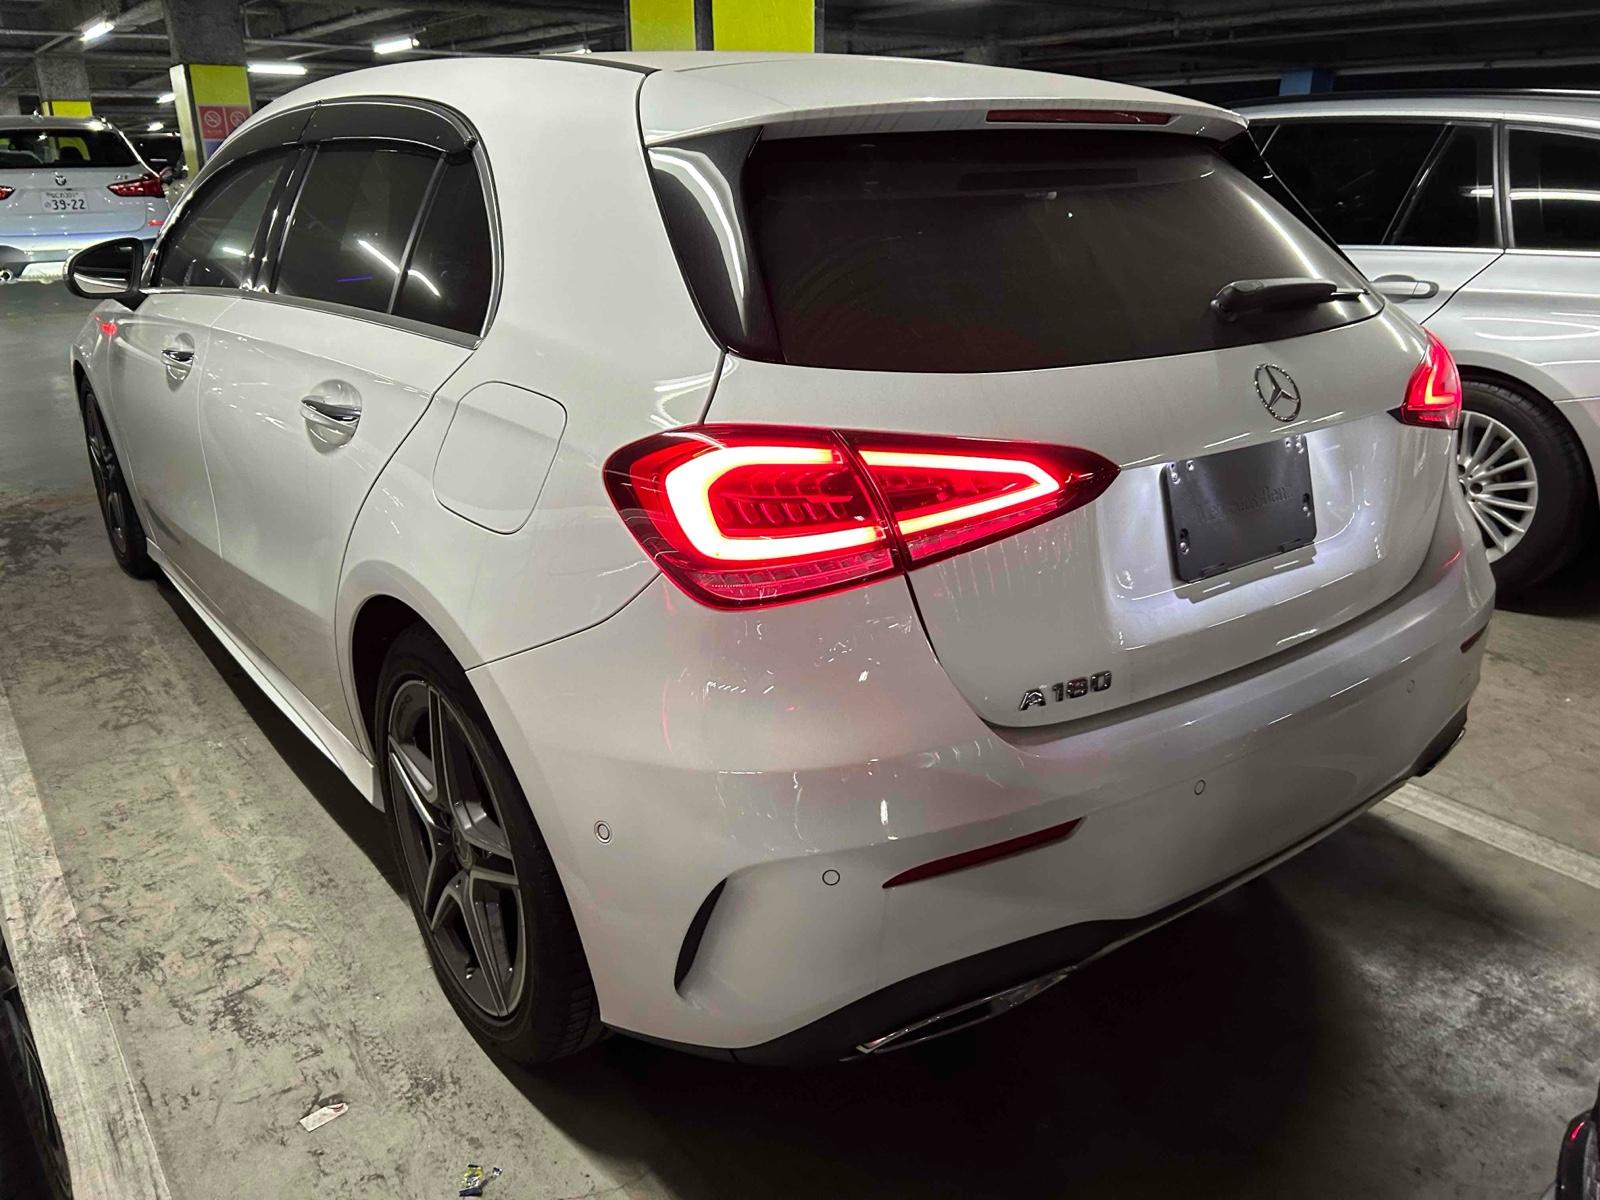 Mercedes-Benz A Class A180S MANY AMG LINE RE